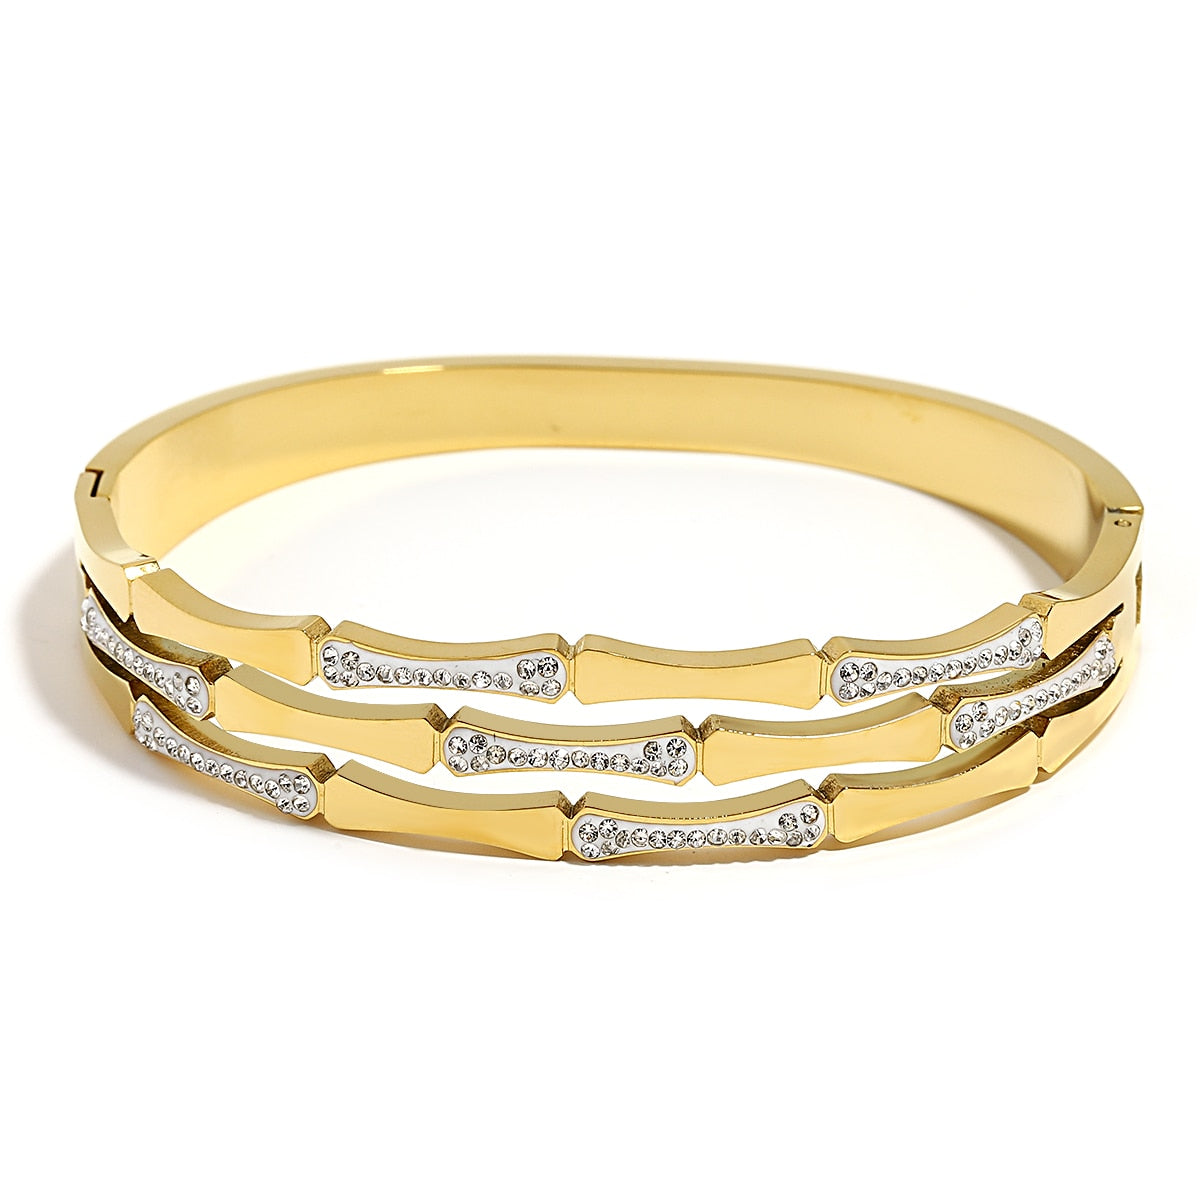 Chic Geometric Gold-Plated Stainless Steel Bangles